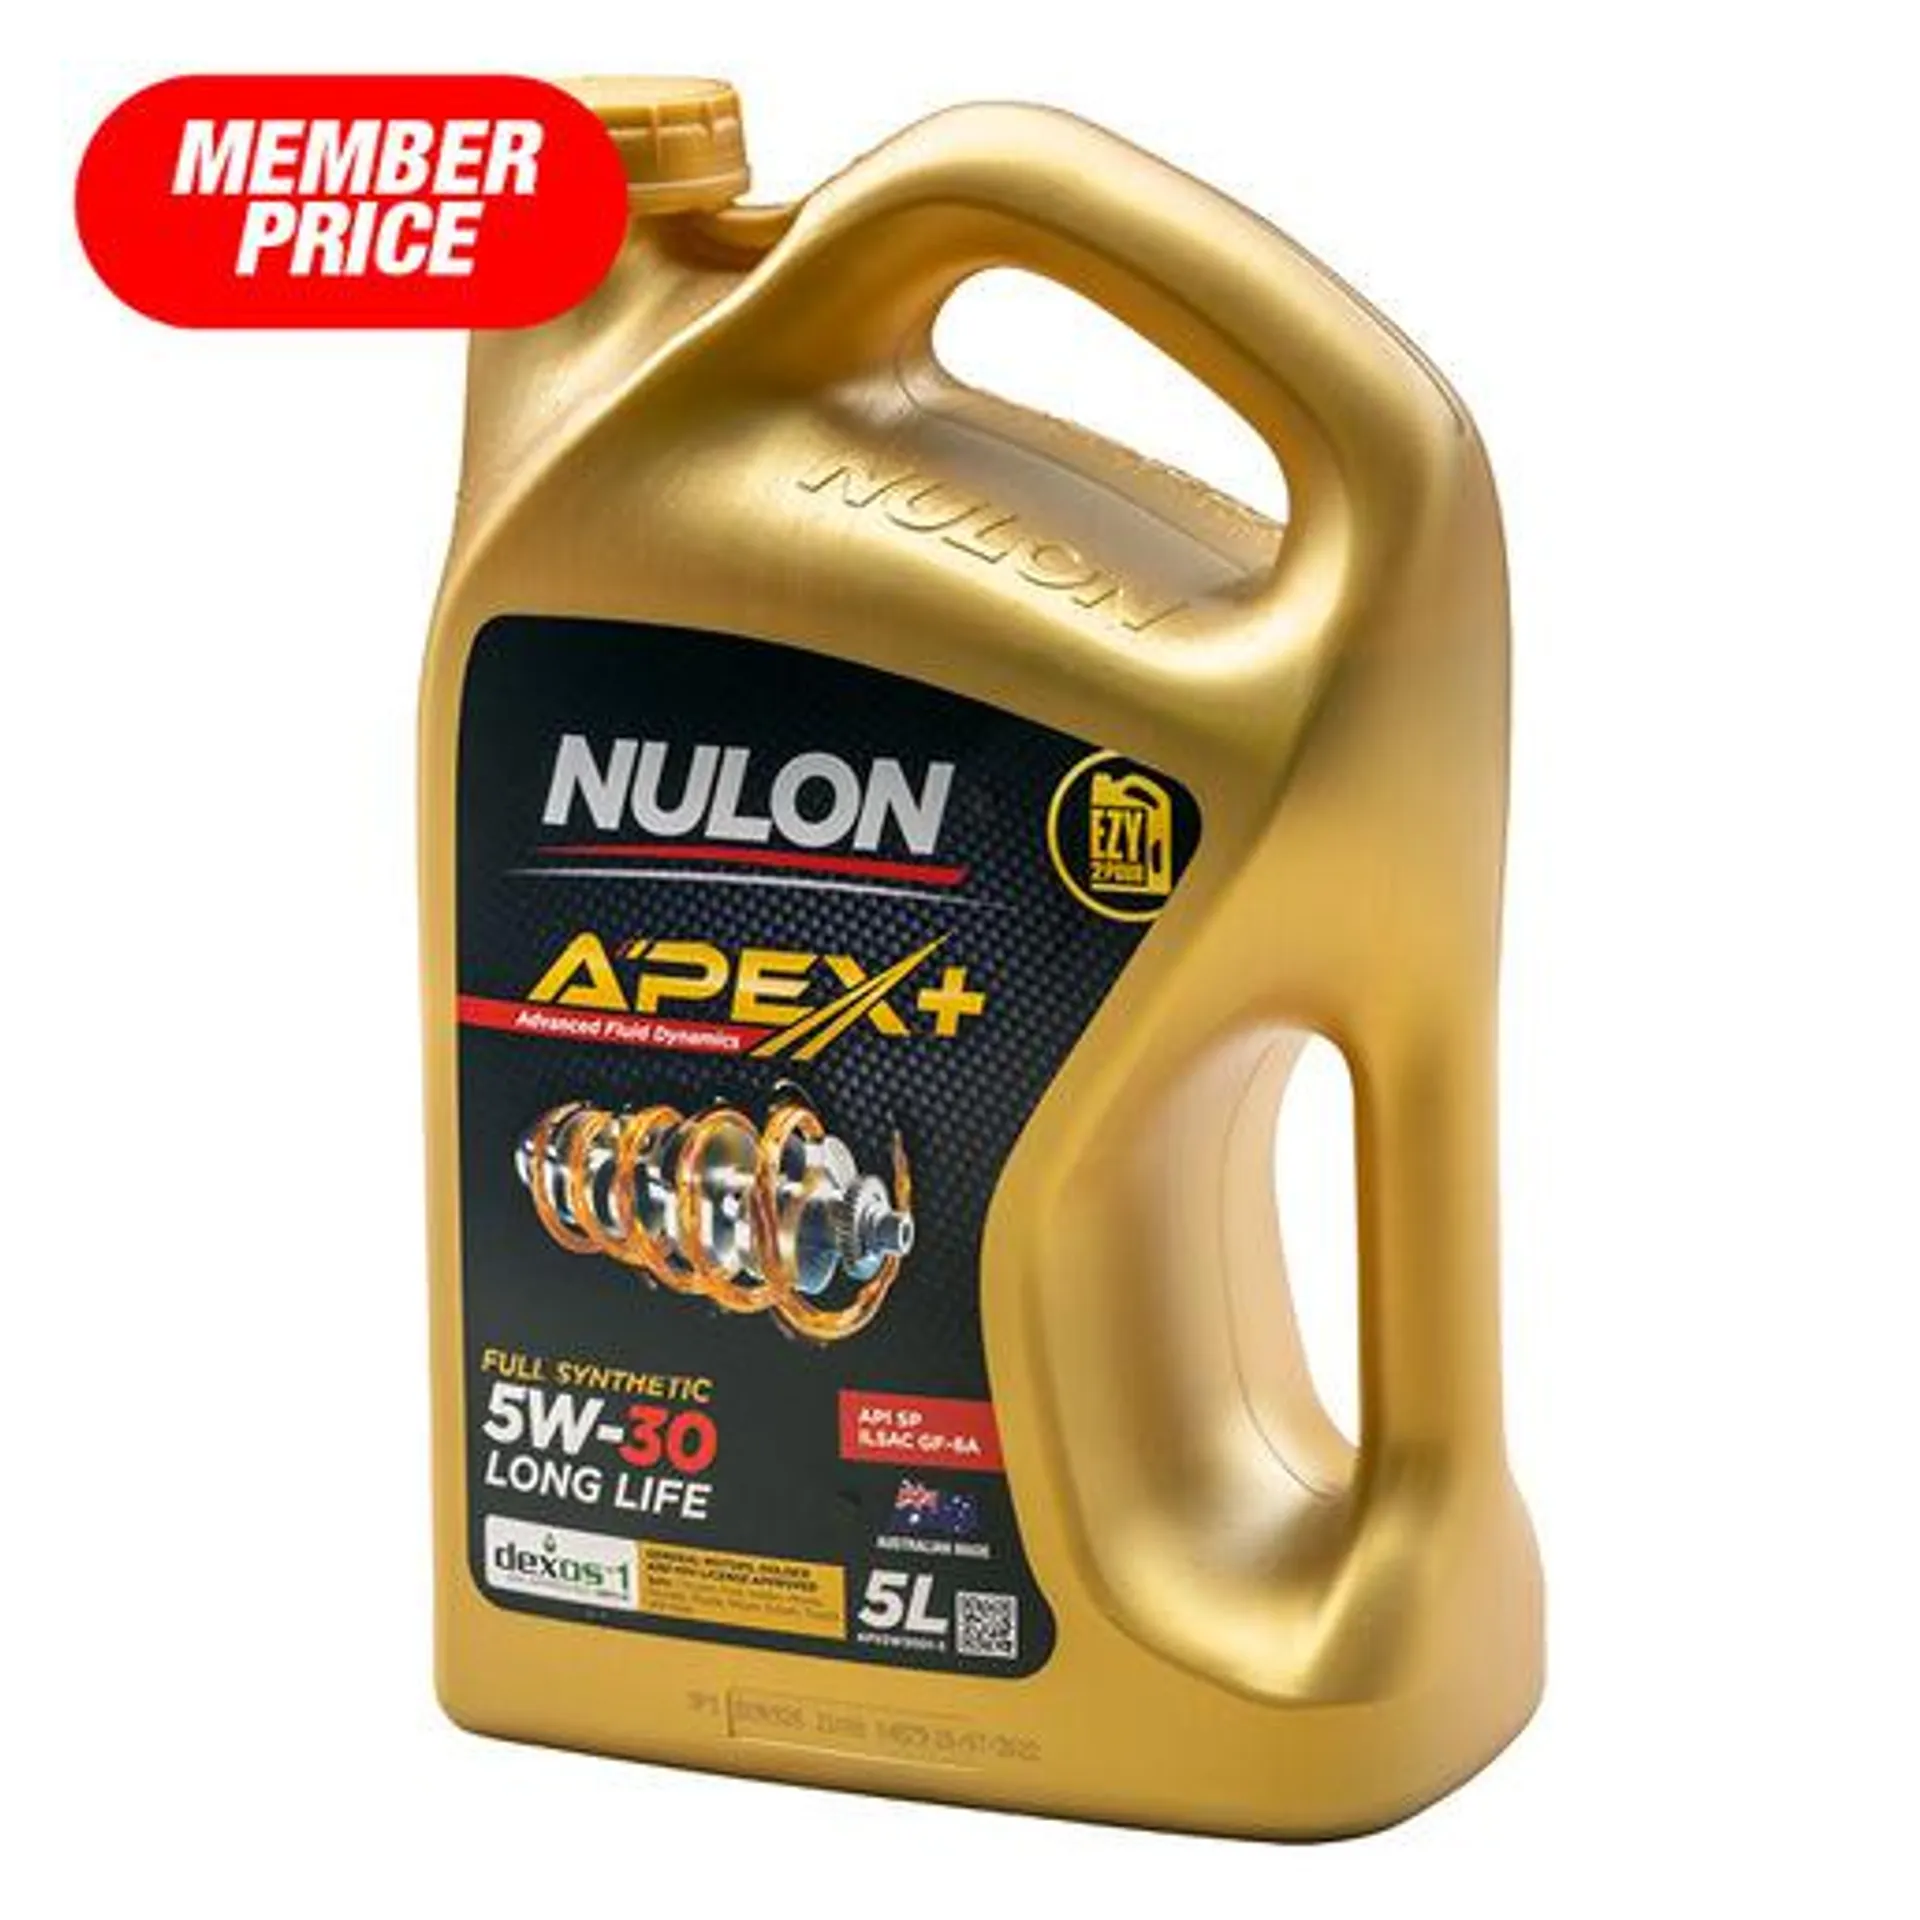 Nulon Apex+ Full Synthetic 5W-30 Long Life Engine Oil 5L - APX5W30D1-5